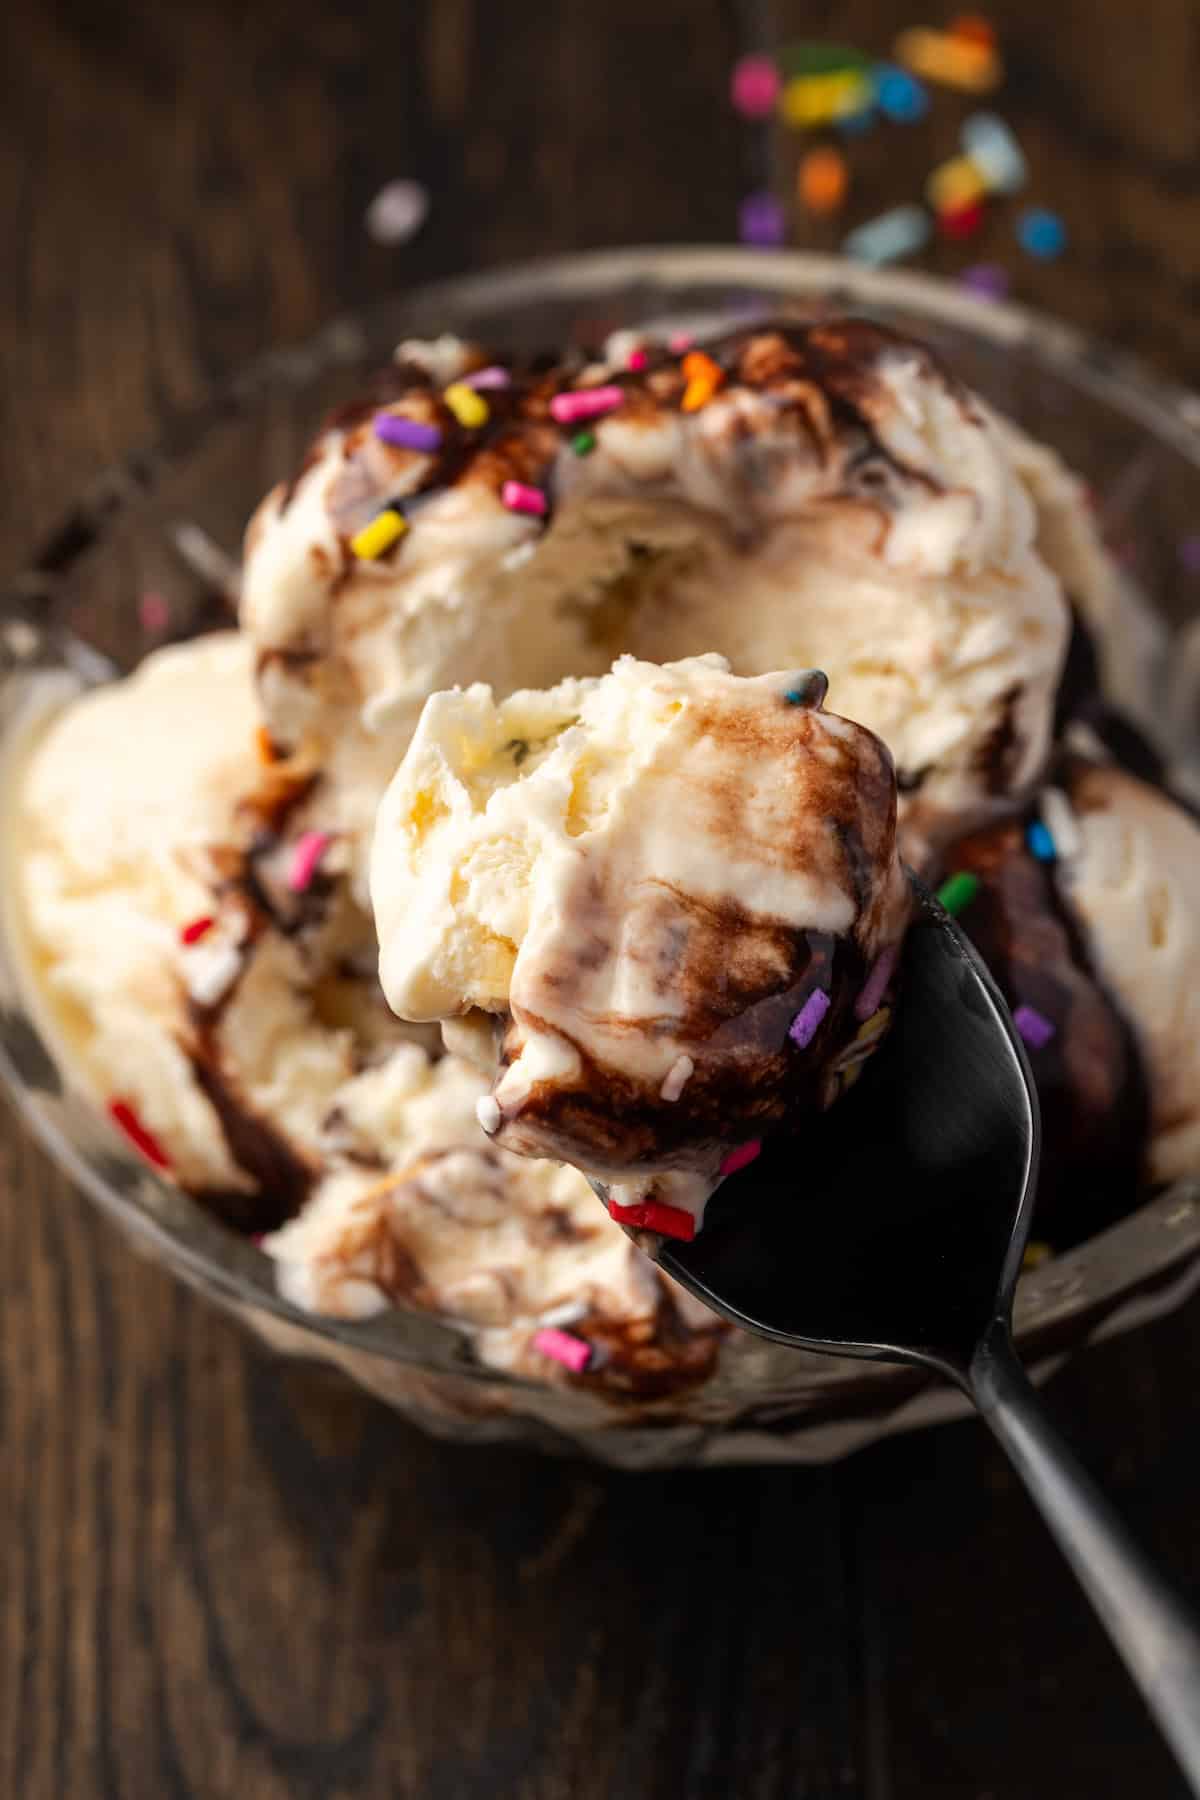 A spoonful of ice cream held over a bowl with scoops of ice cream covered with chocolate sauce and sprinkles.